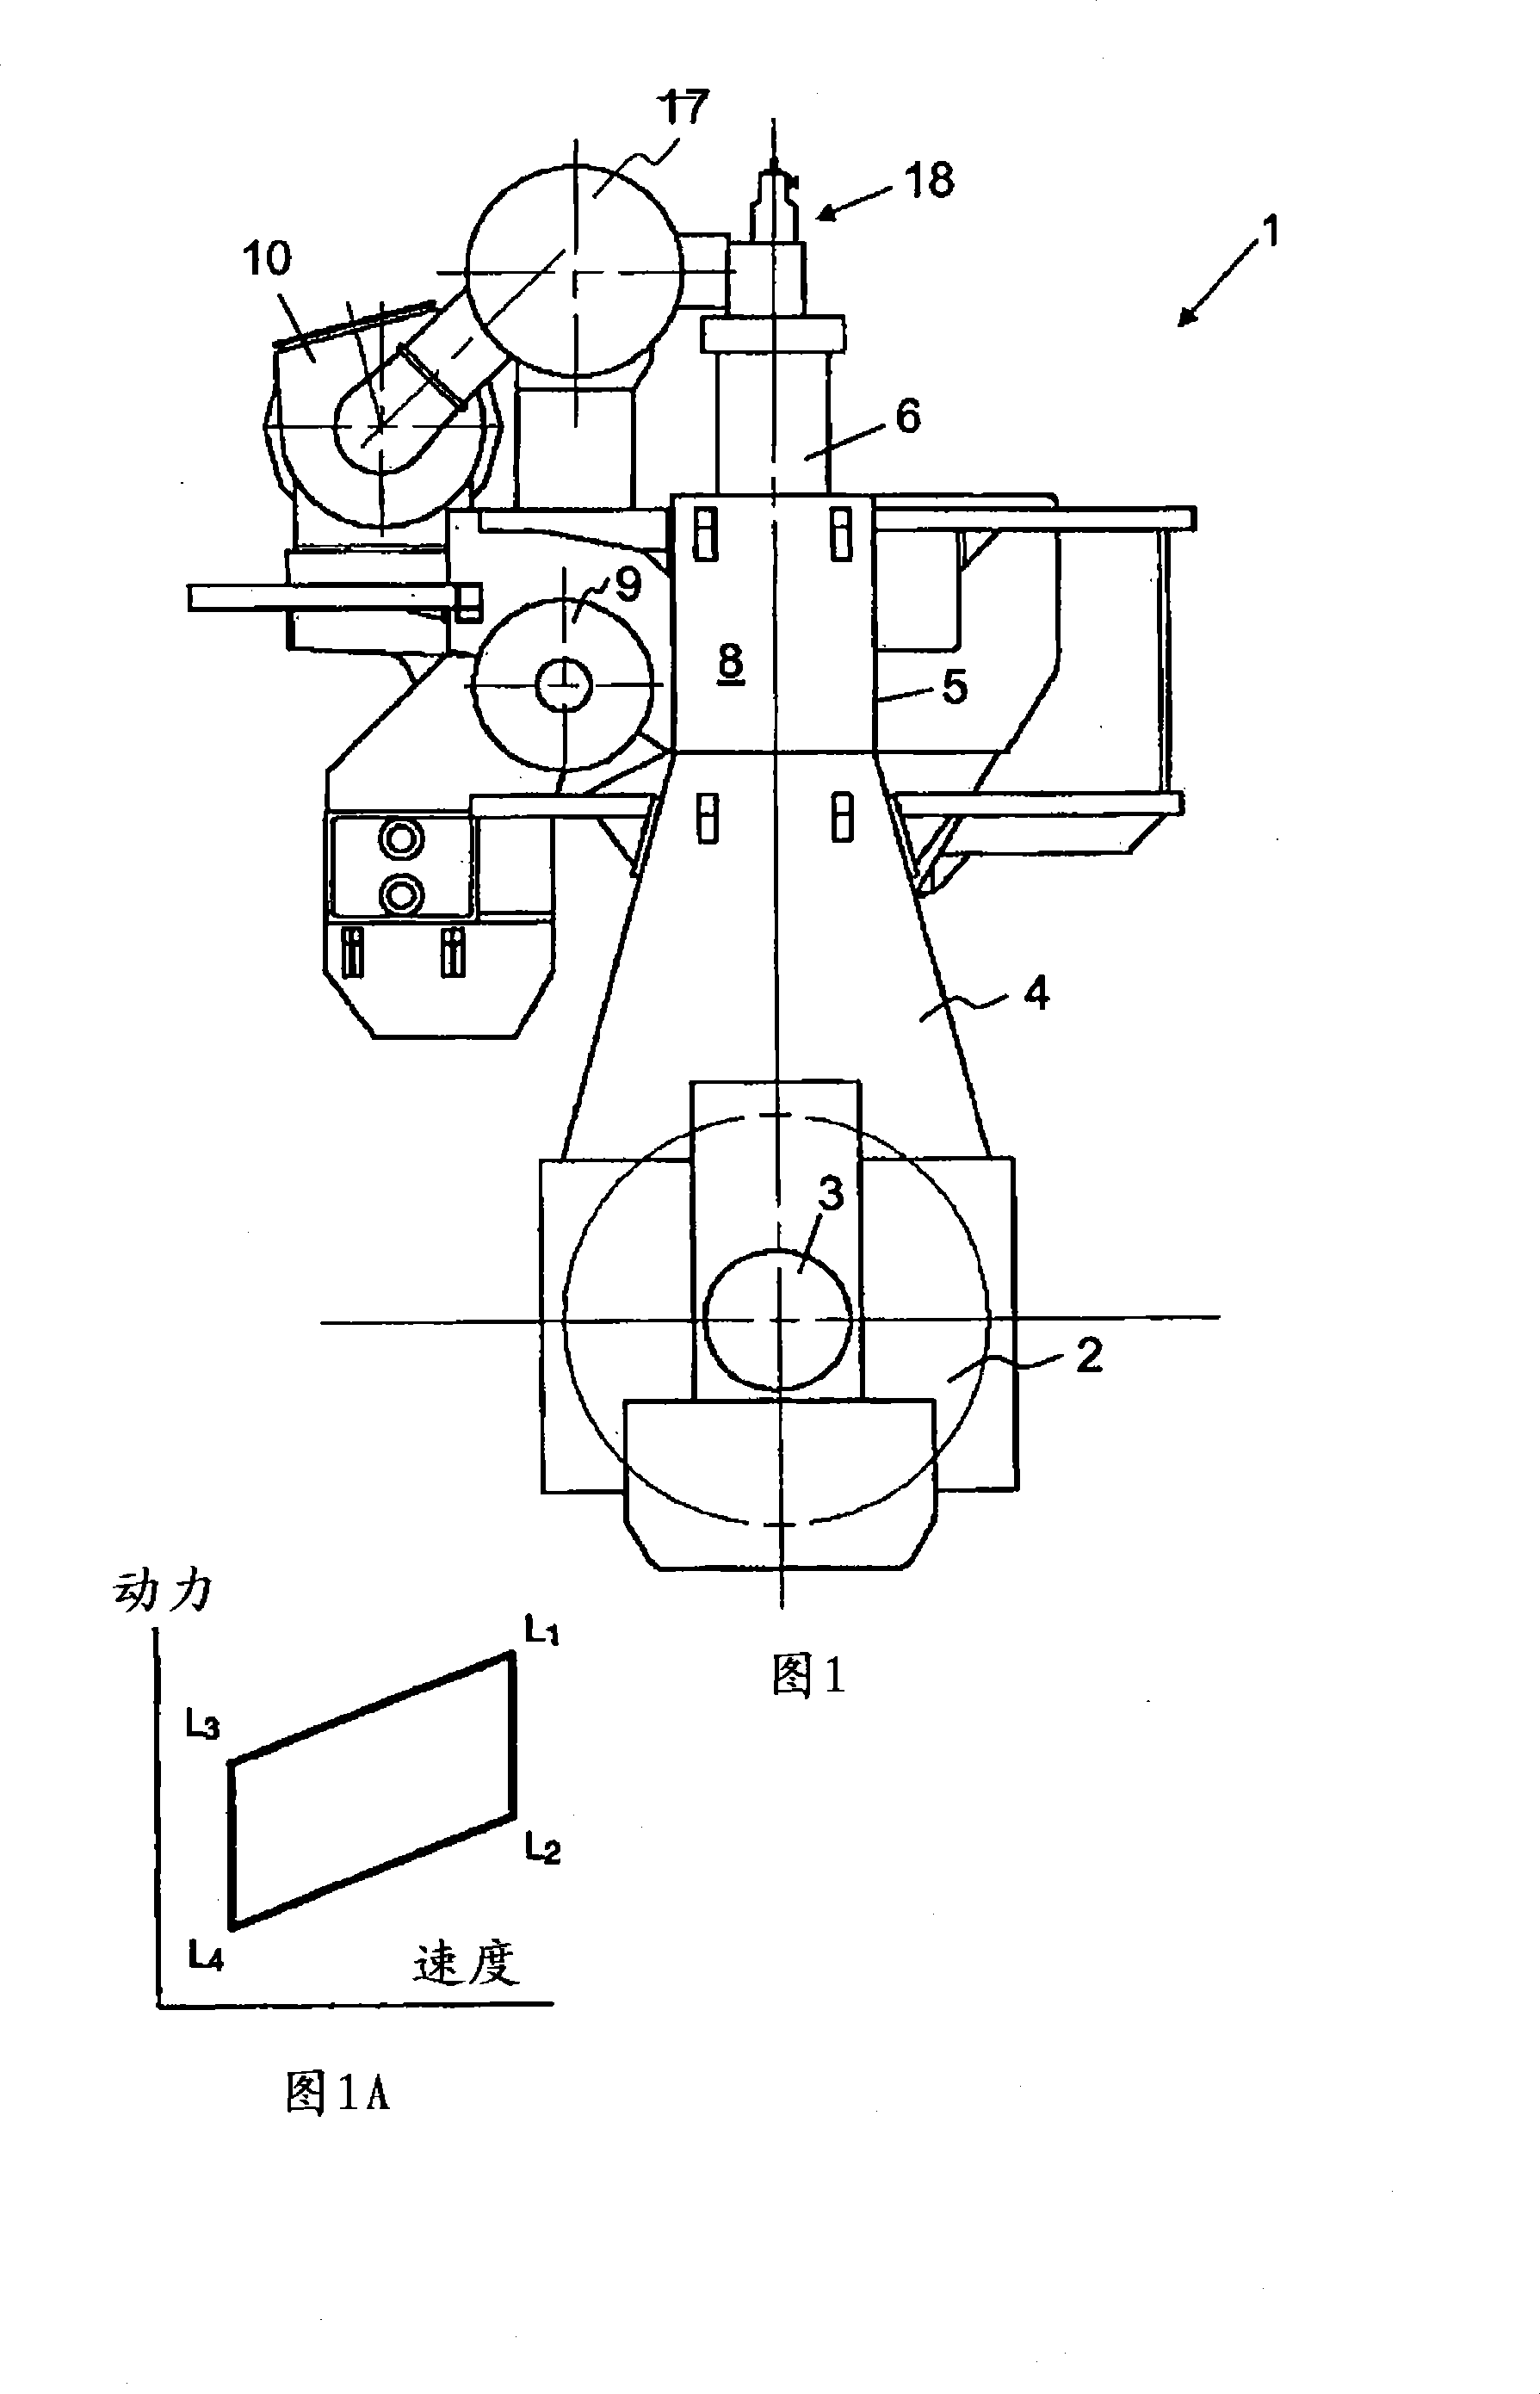 Exhaust valve assembly for a large two-stroke diesel engine